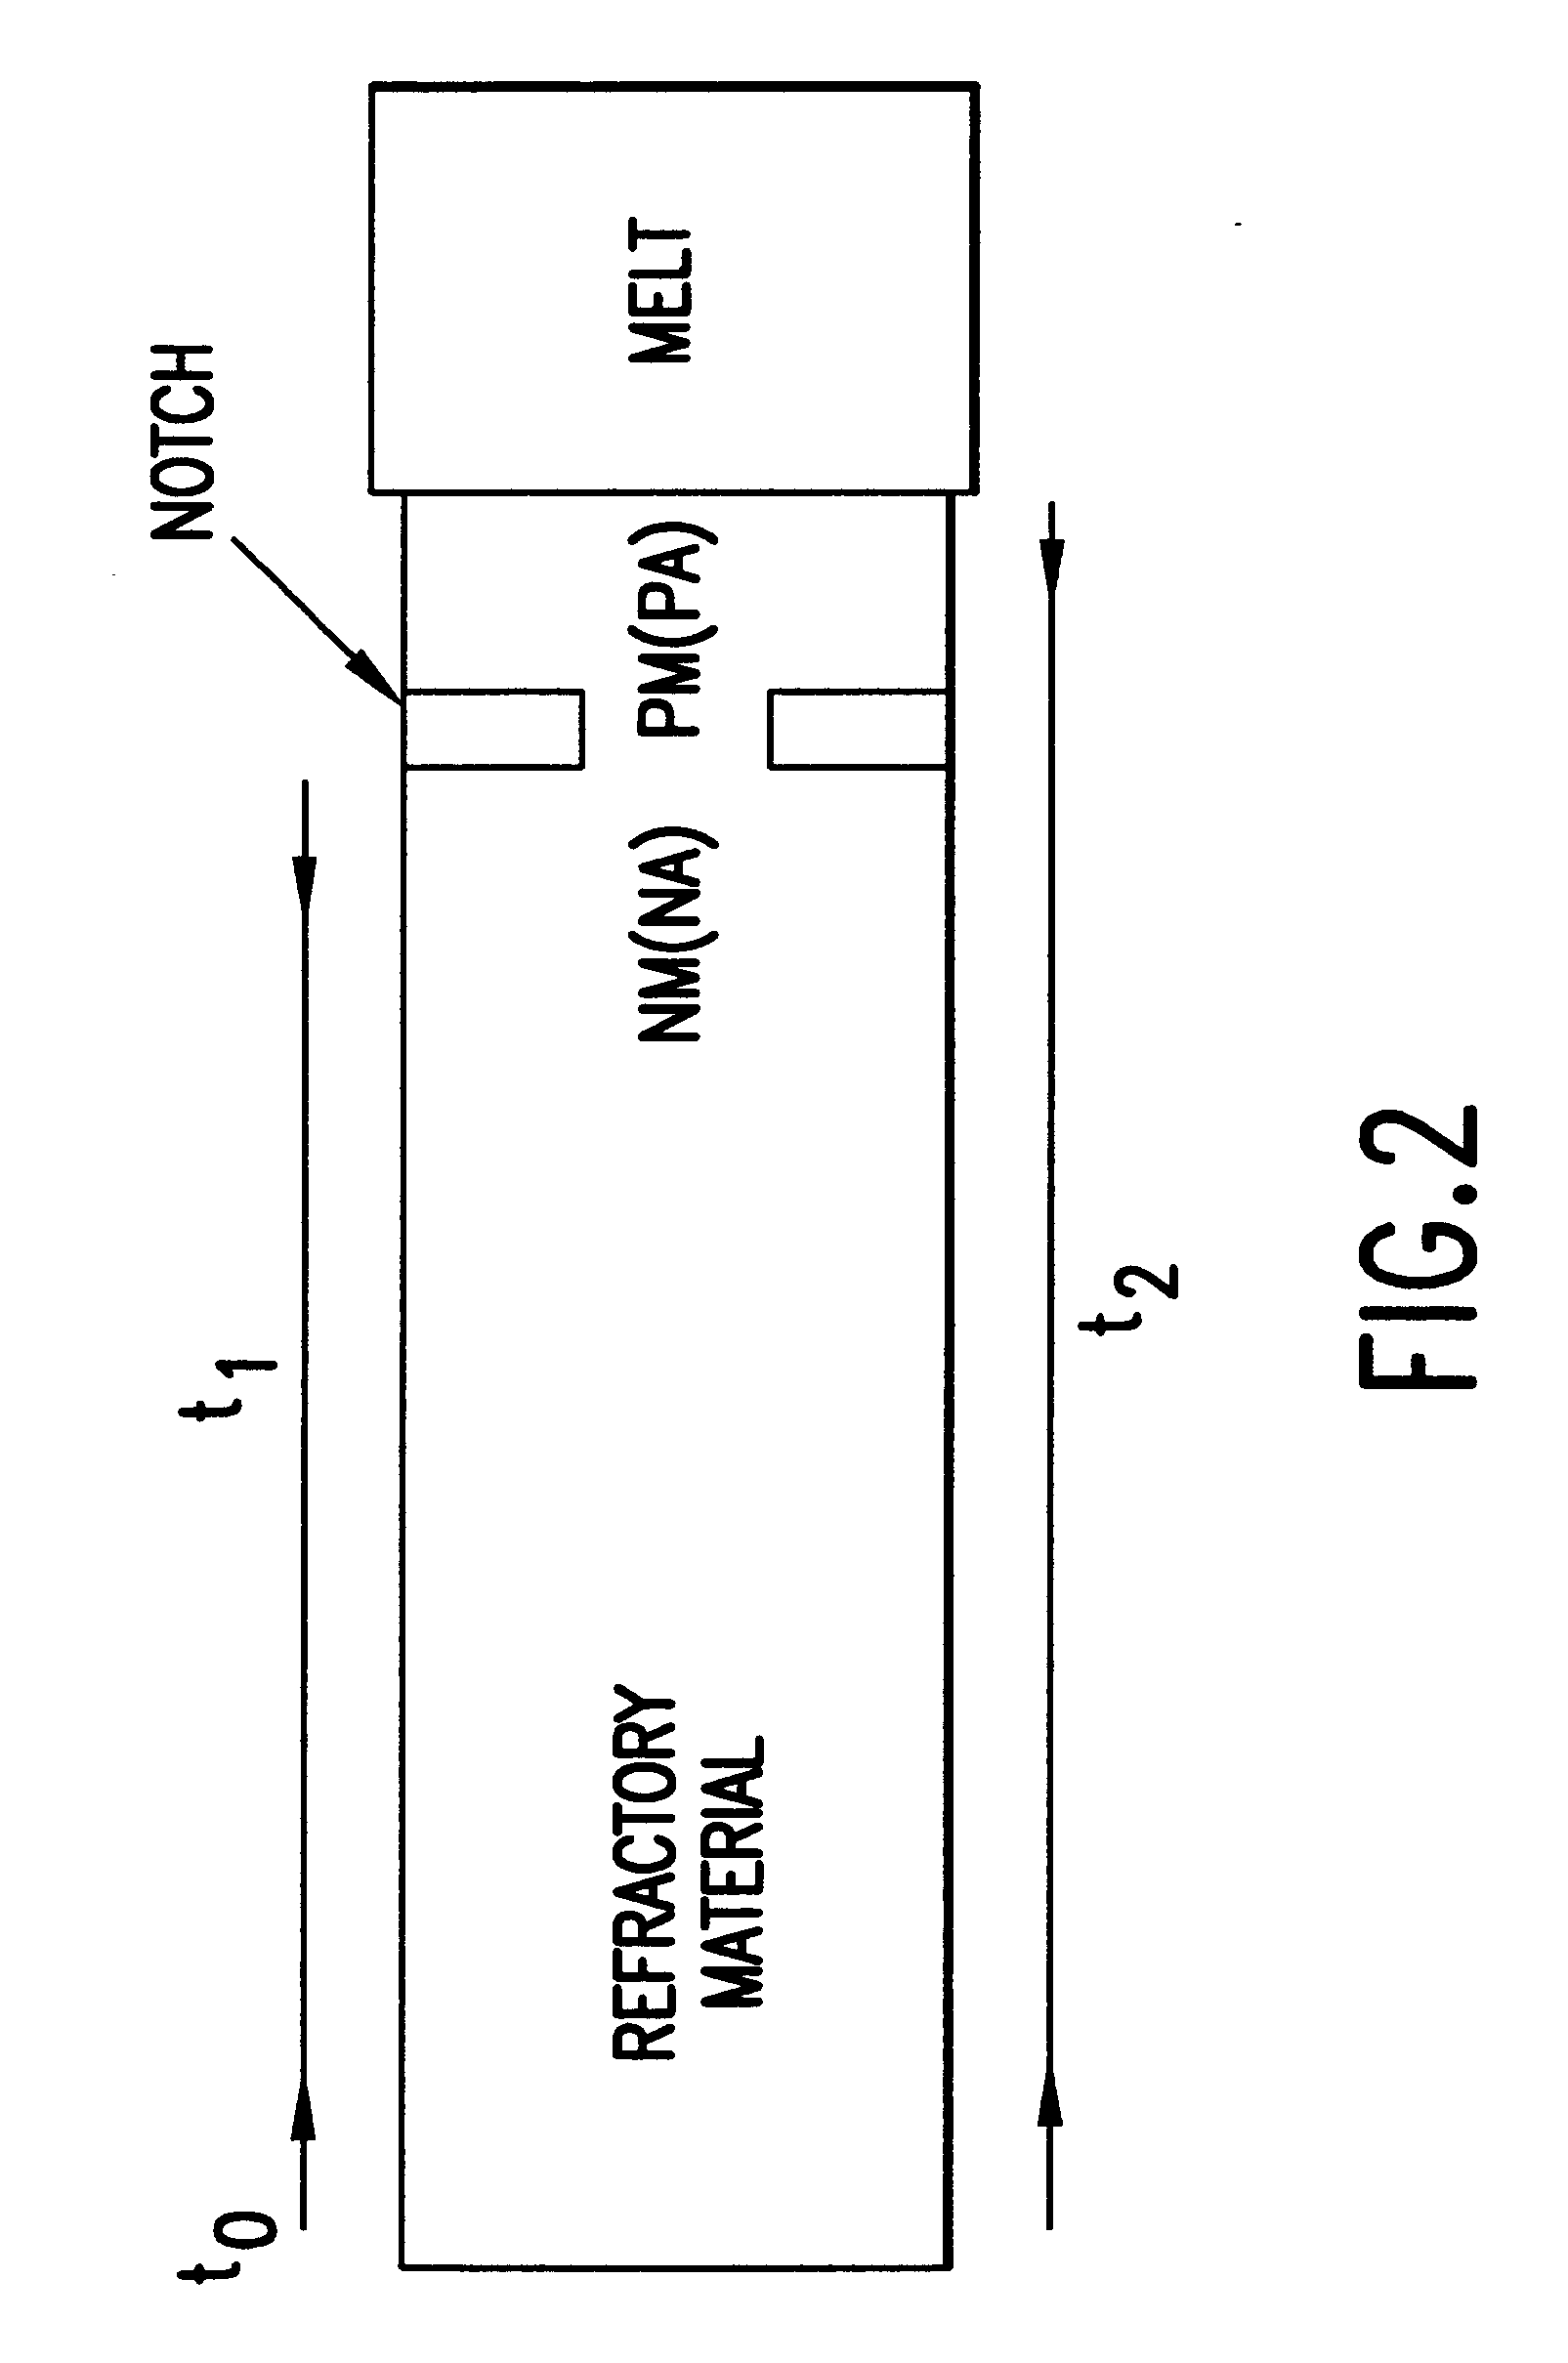 Apparatus and method for high temperature viscosity and temperature measurements